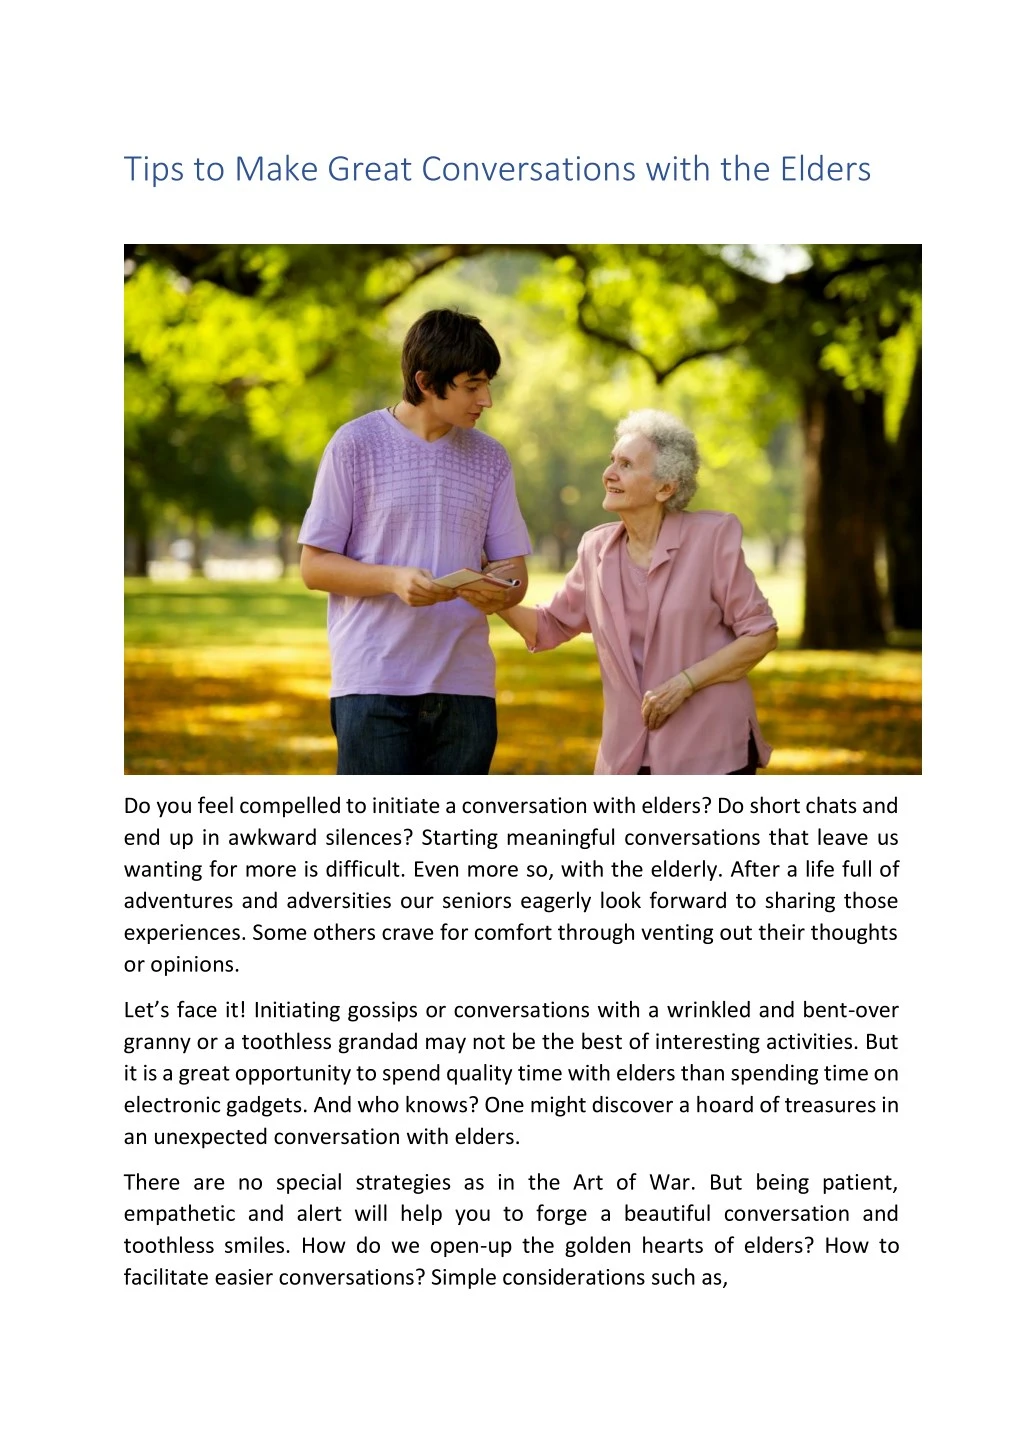 tips to make great conversations with the elders